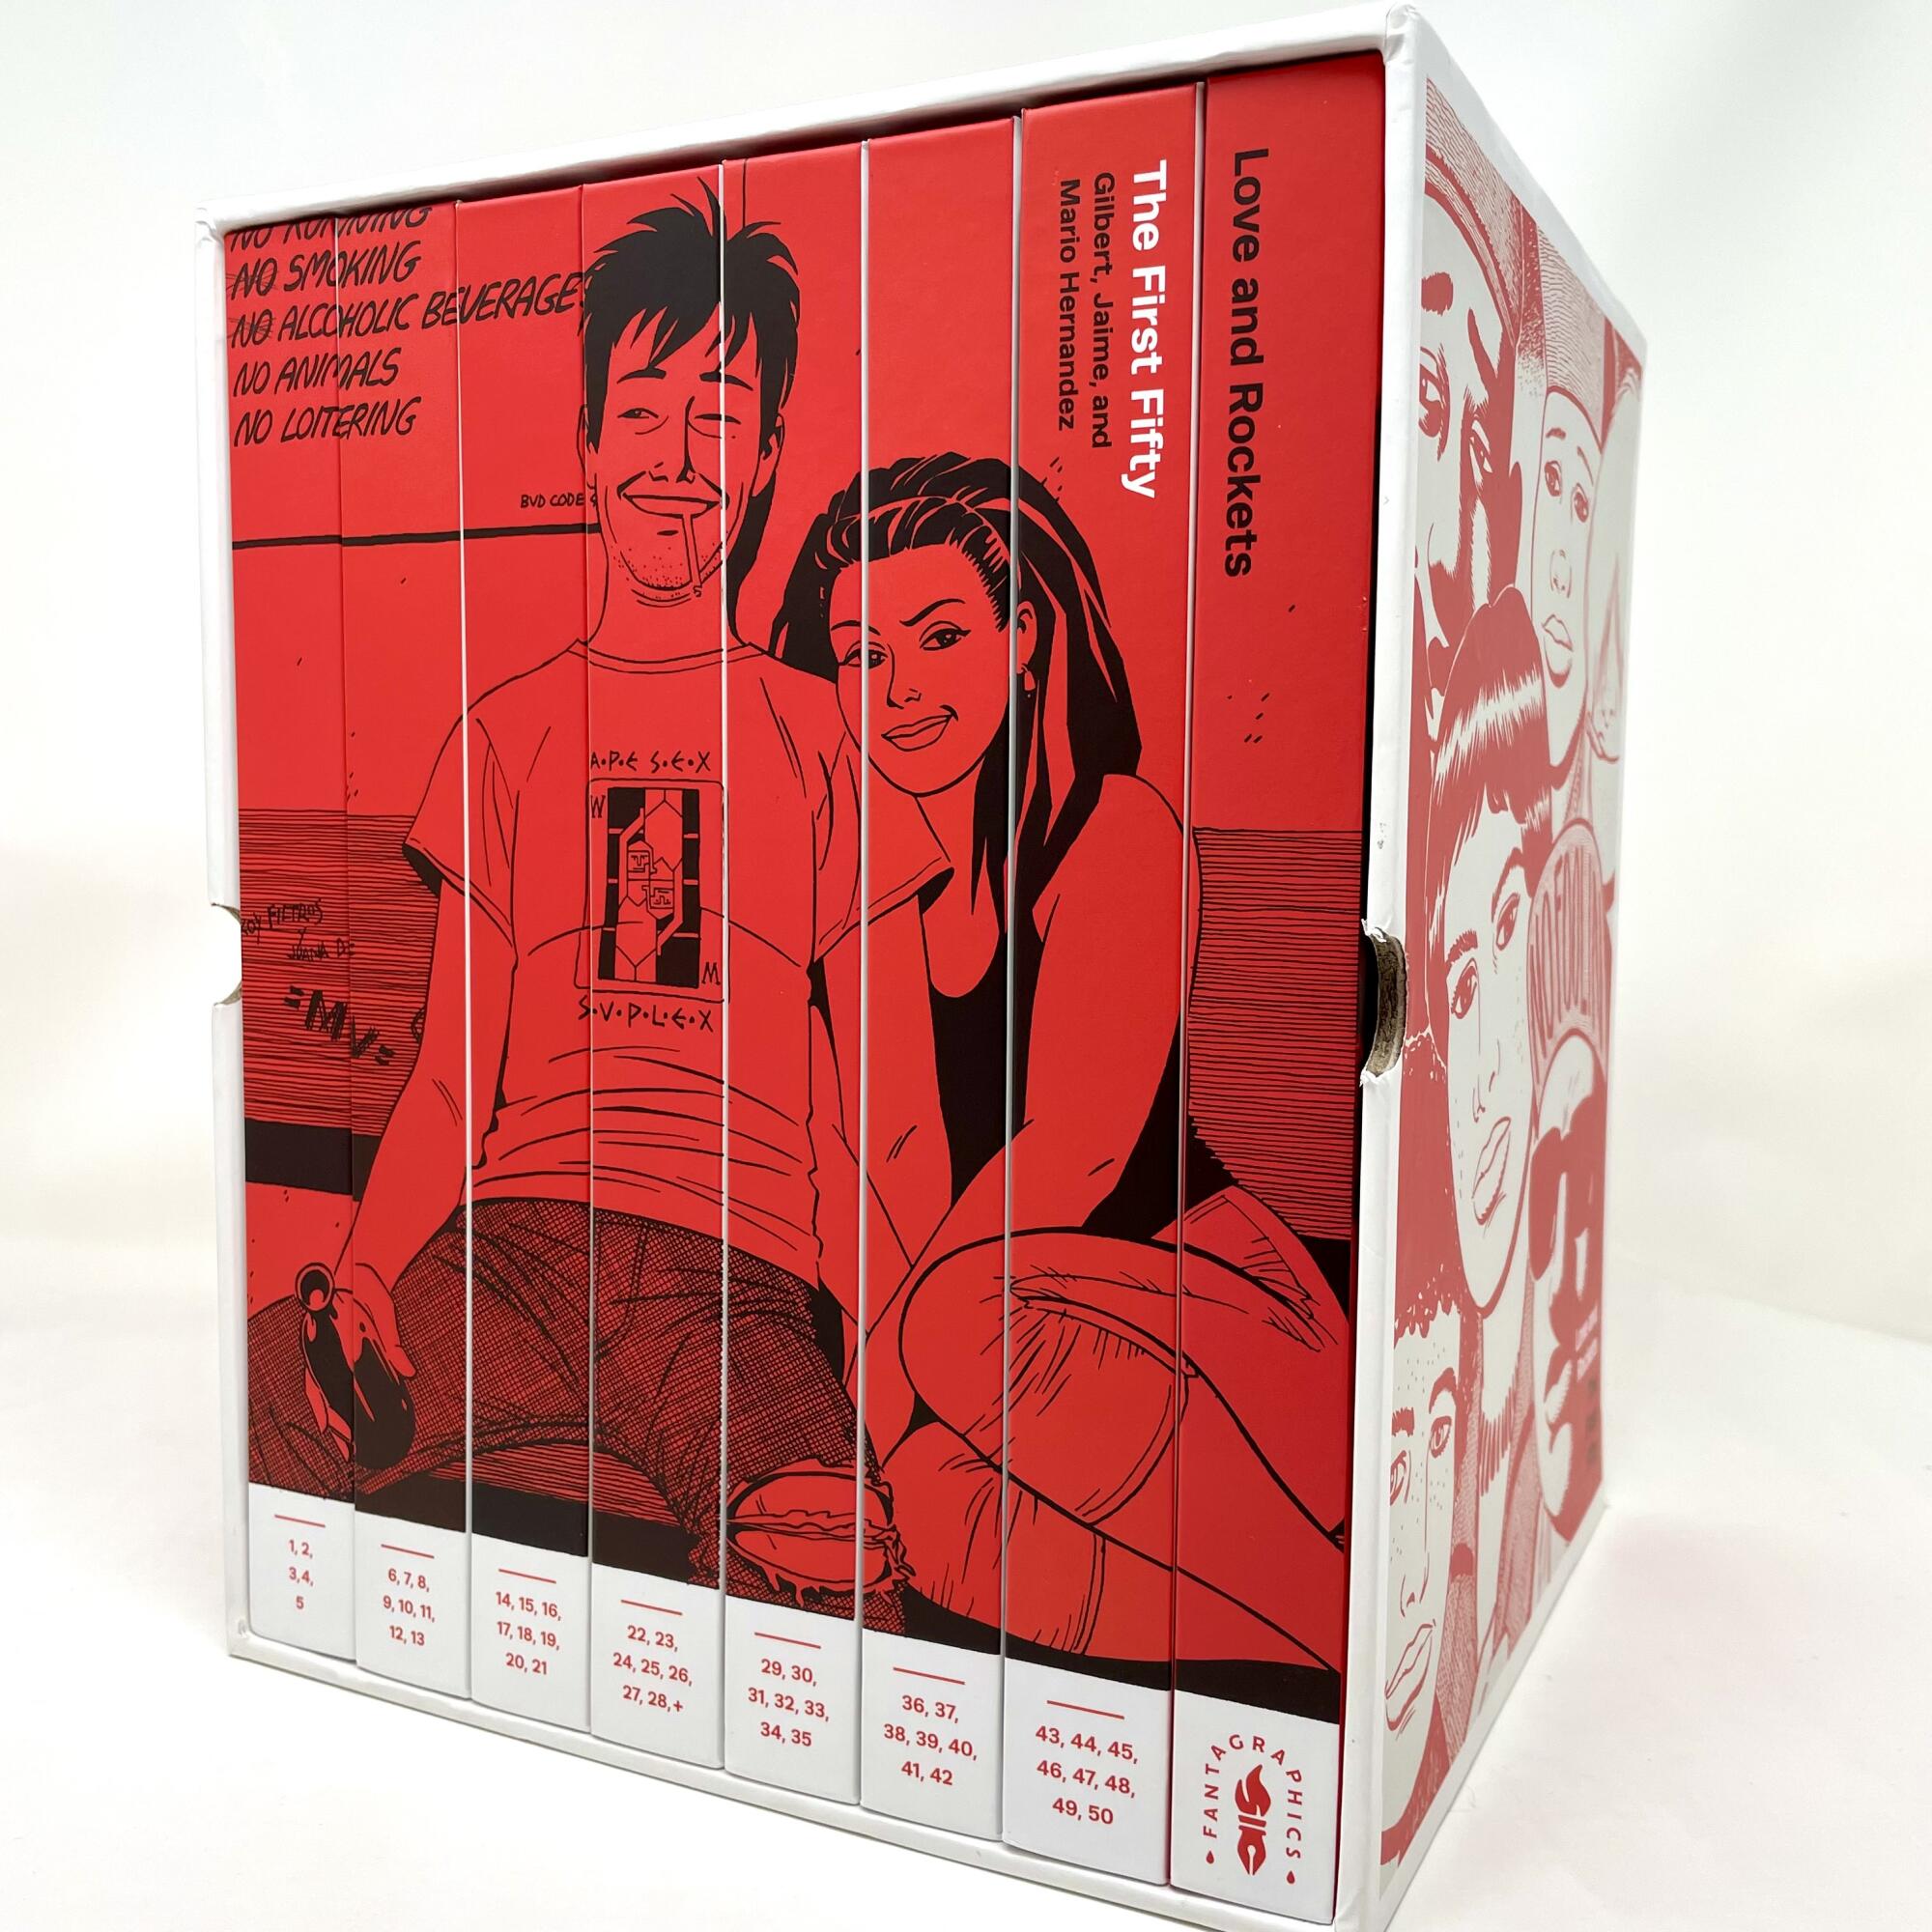 Eight hardback volumes are seen in a monochromatic red/ white slip case that features Maggie and Ray of "Love & Rockets"